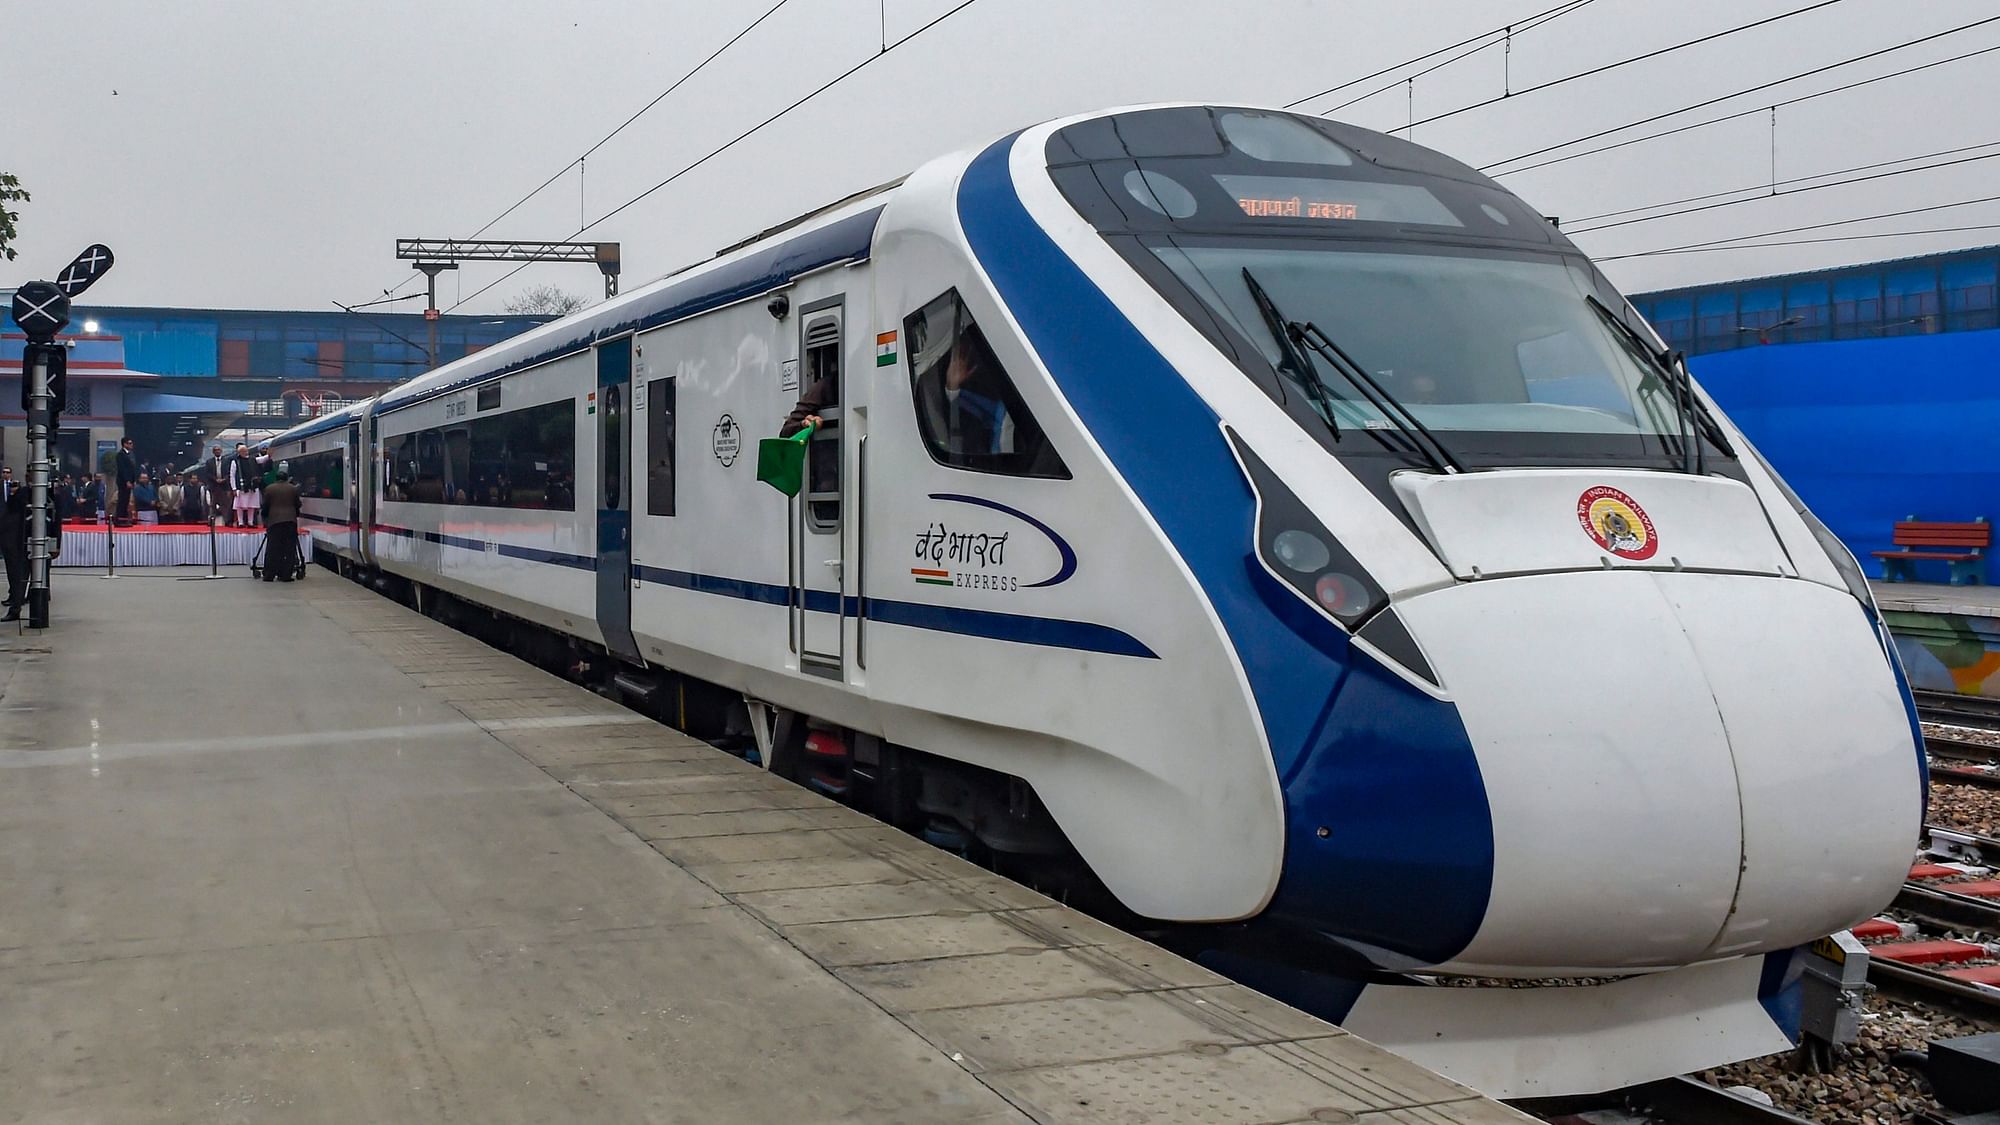 Indian Railways on Friday, 21 August, cancelled the tender for the manufacturing of 44 rakes of Train 18, which has been re-christened as Vande Bharat Express.